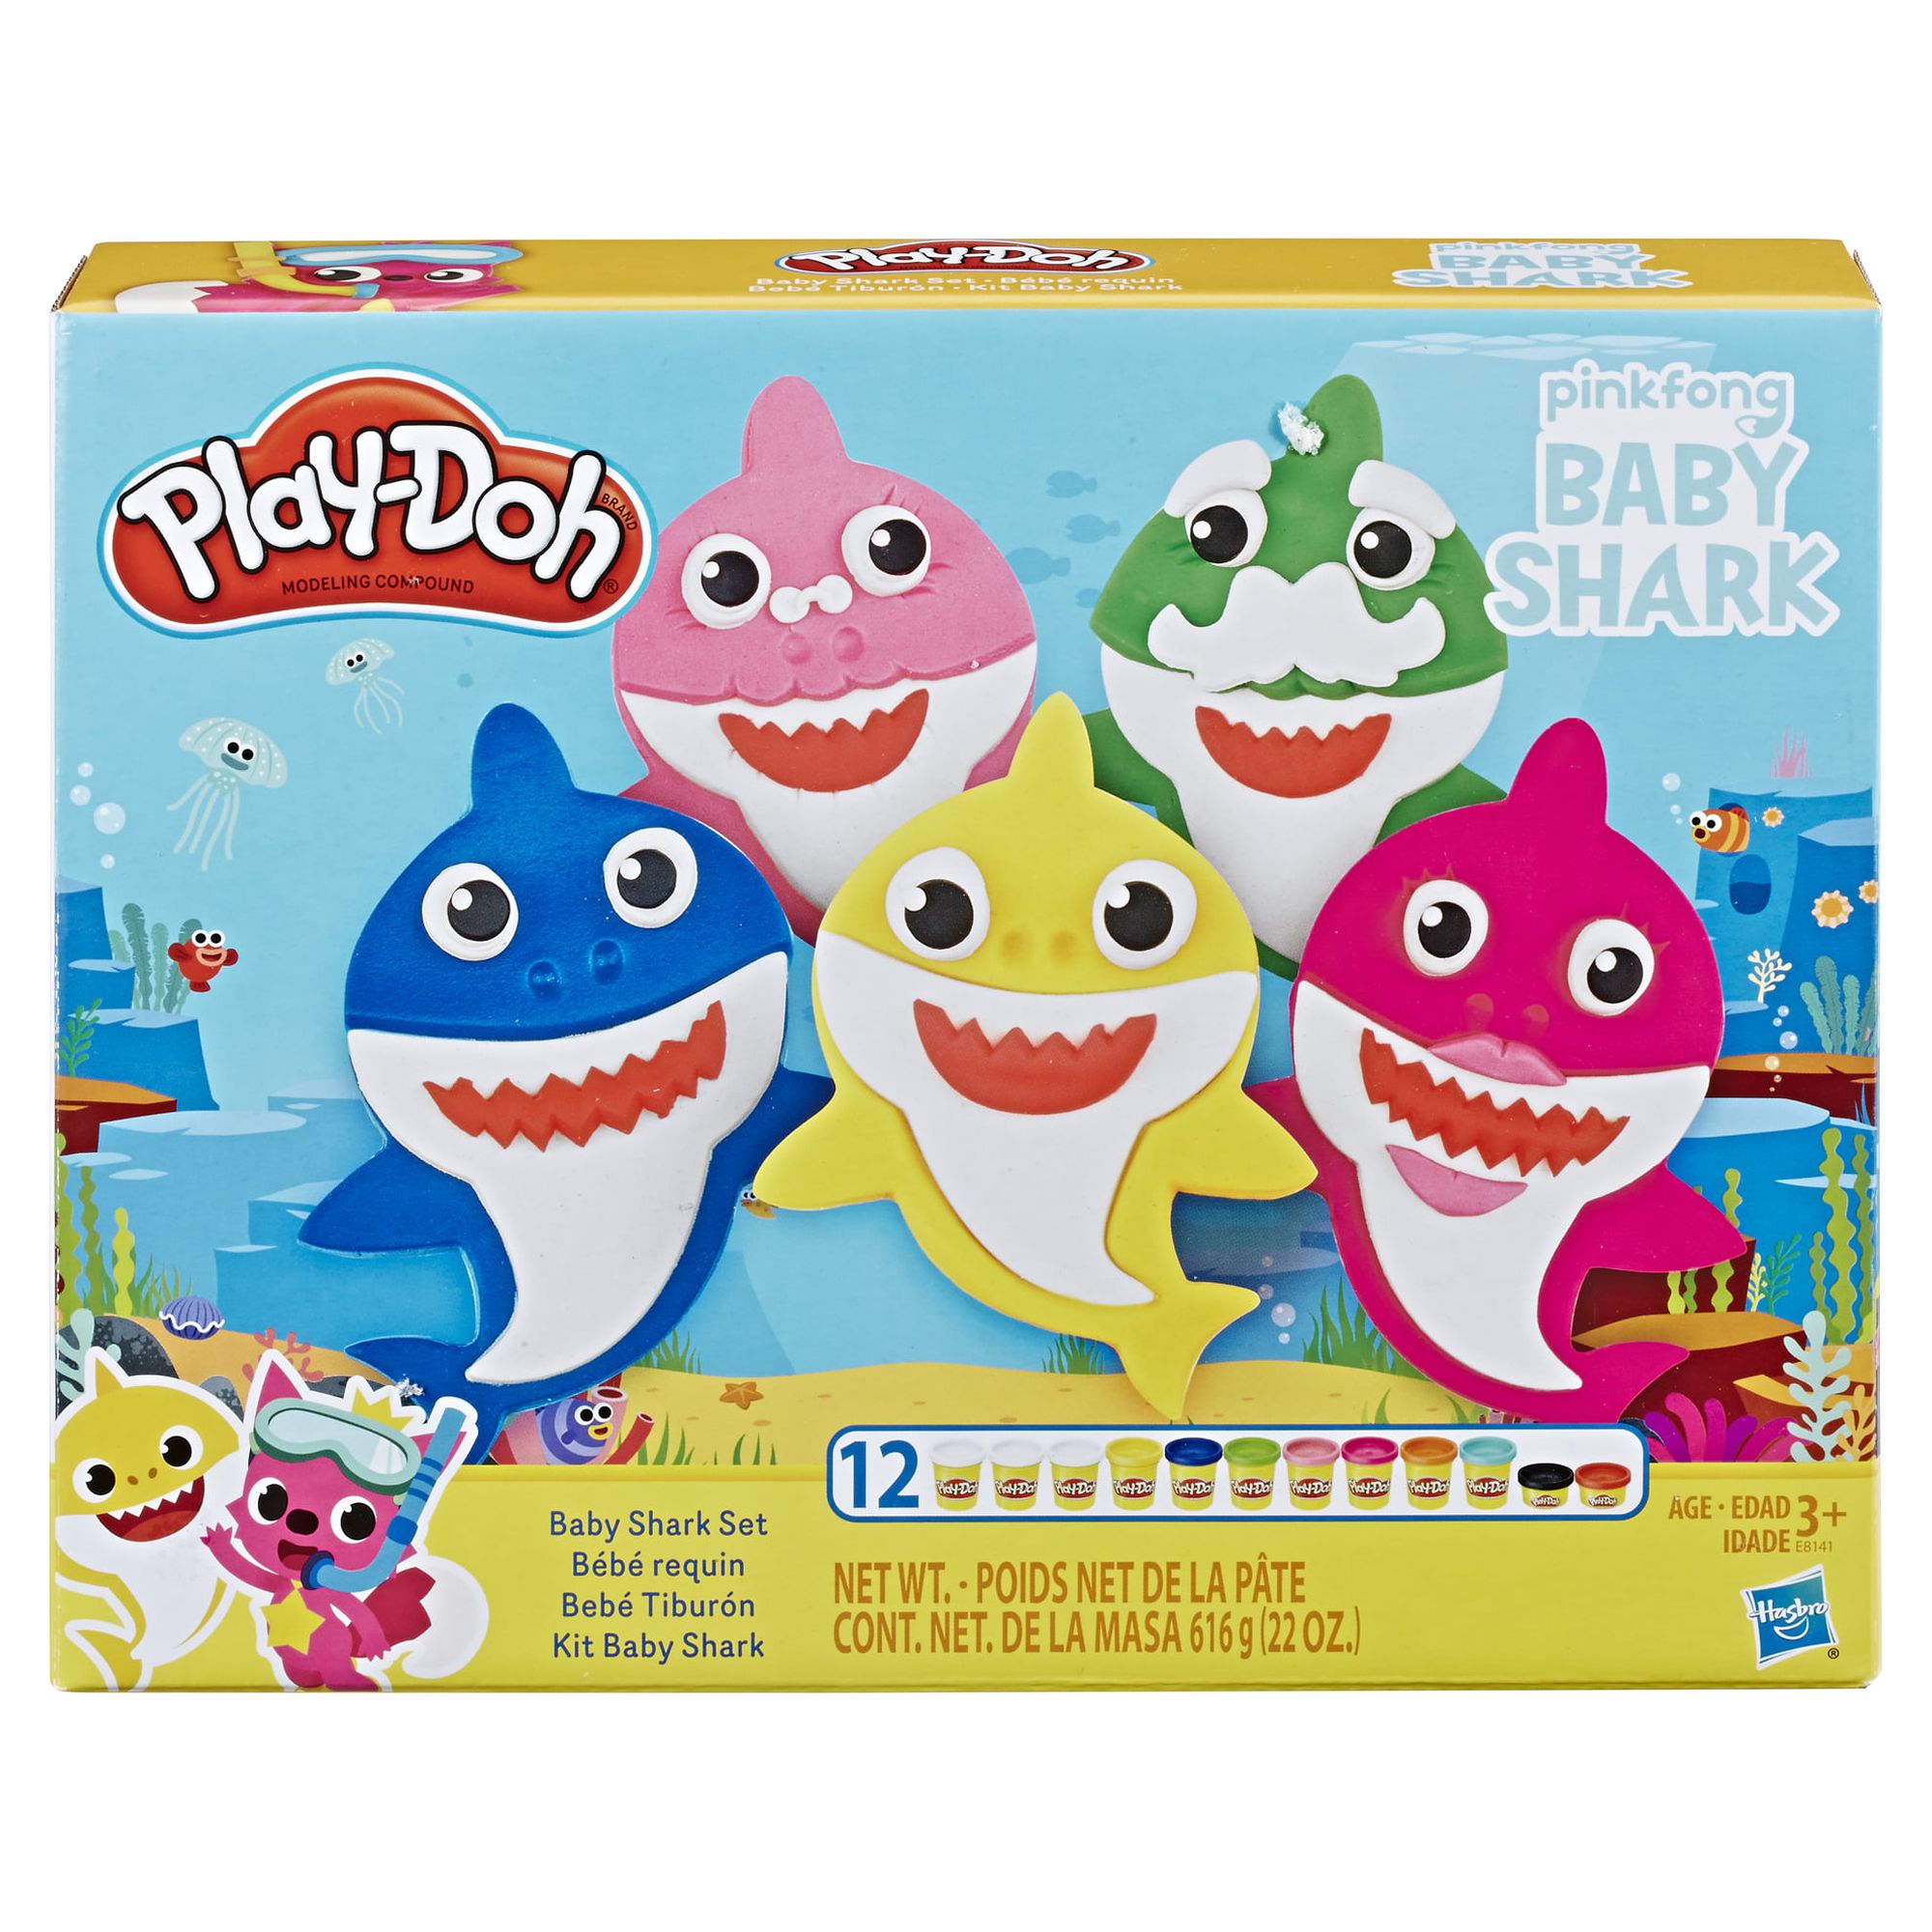 Play-Doh Pinkfong Baby Shark Set with 12 Non-Toxic Cans (22 oz) - image 2 of 8